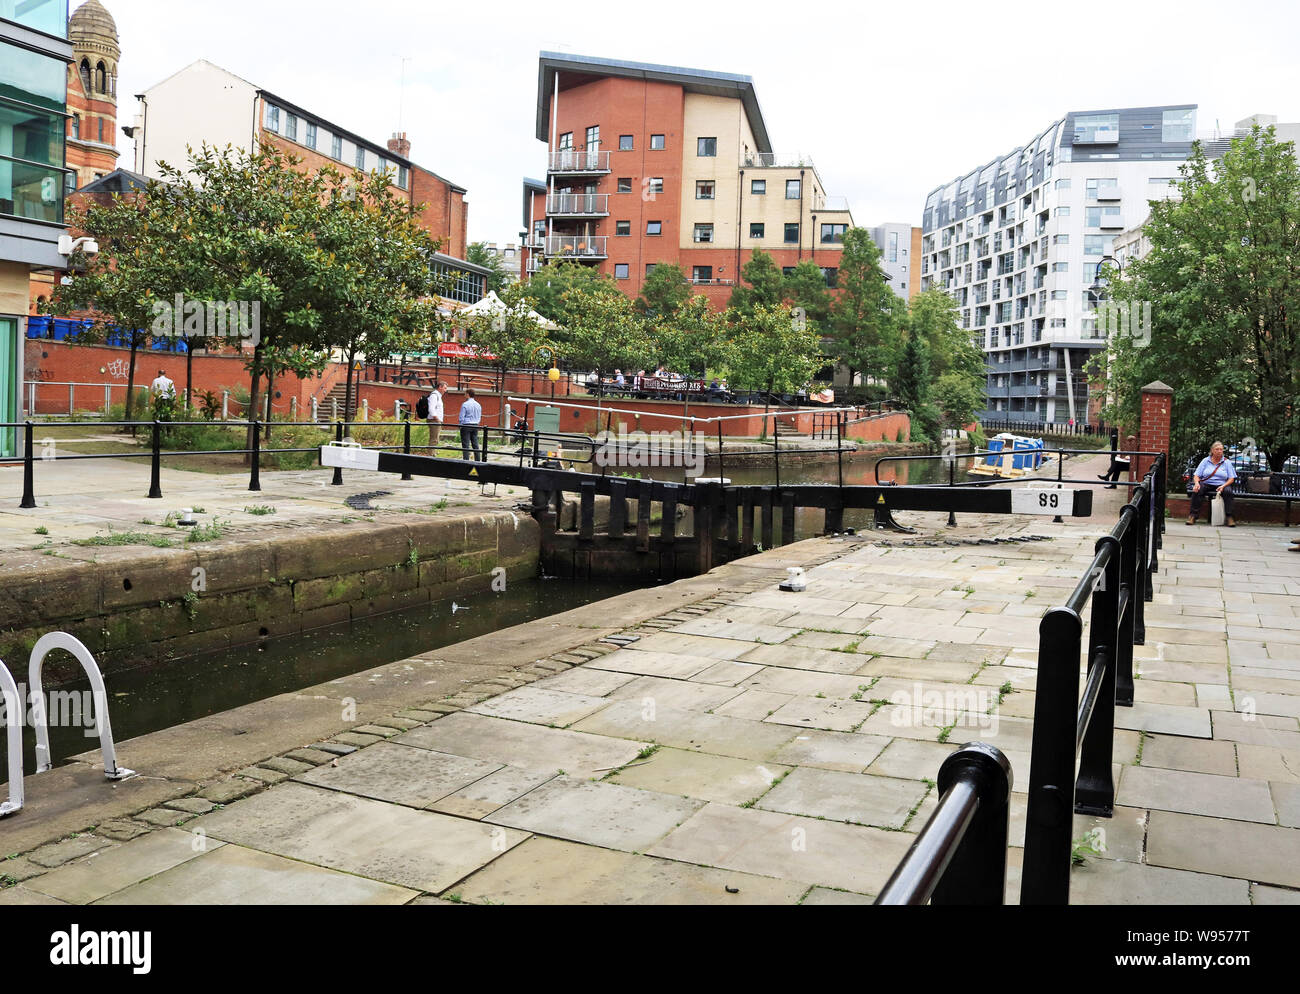 Safety fencing recently installed around Tib Lock on The Rochdale canal in central Manchester. This followed drowning accident in March 2018 Stock Photo